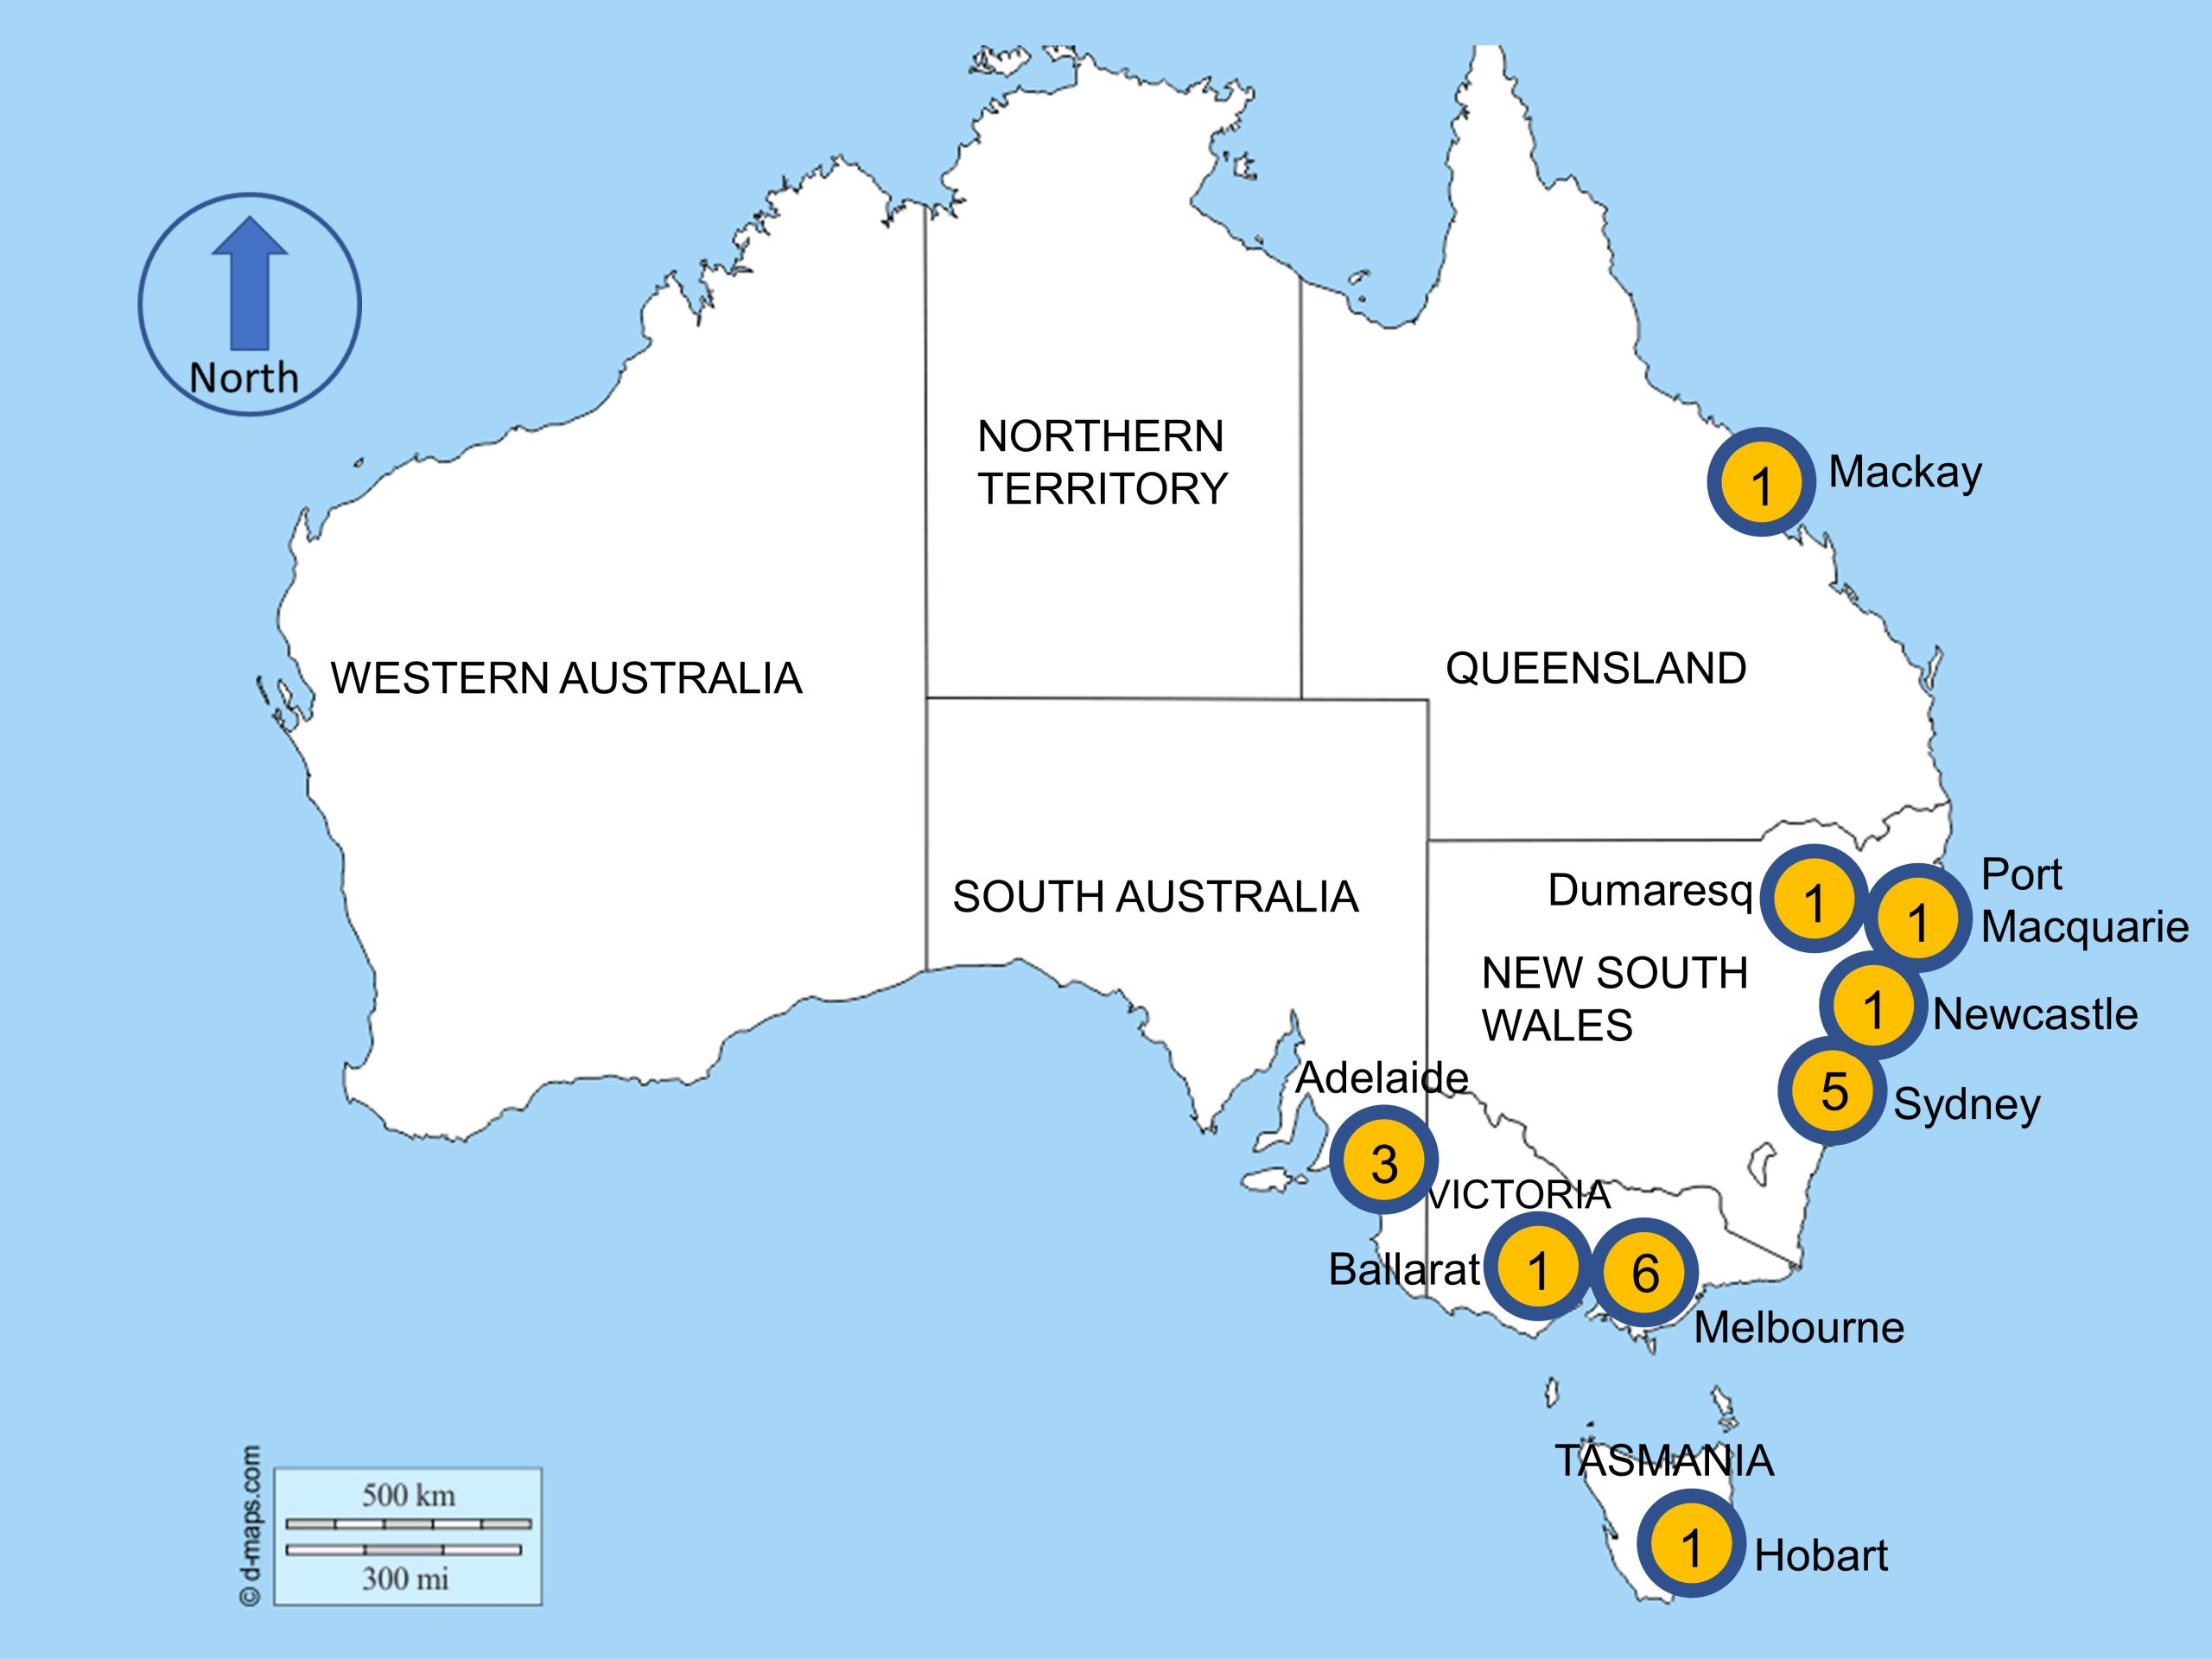 Map of Australia, with the key territories marked, and numbered locations highlighted on the east and south coast of the country